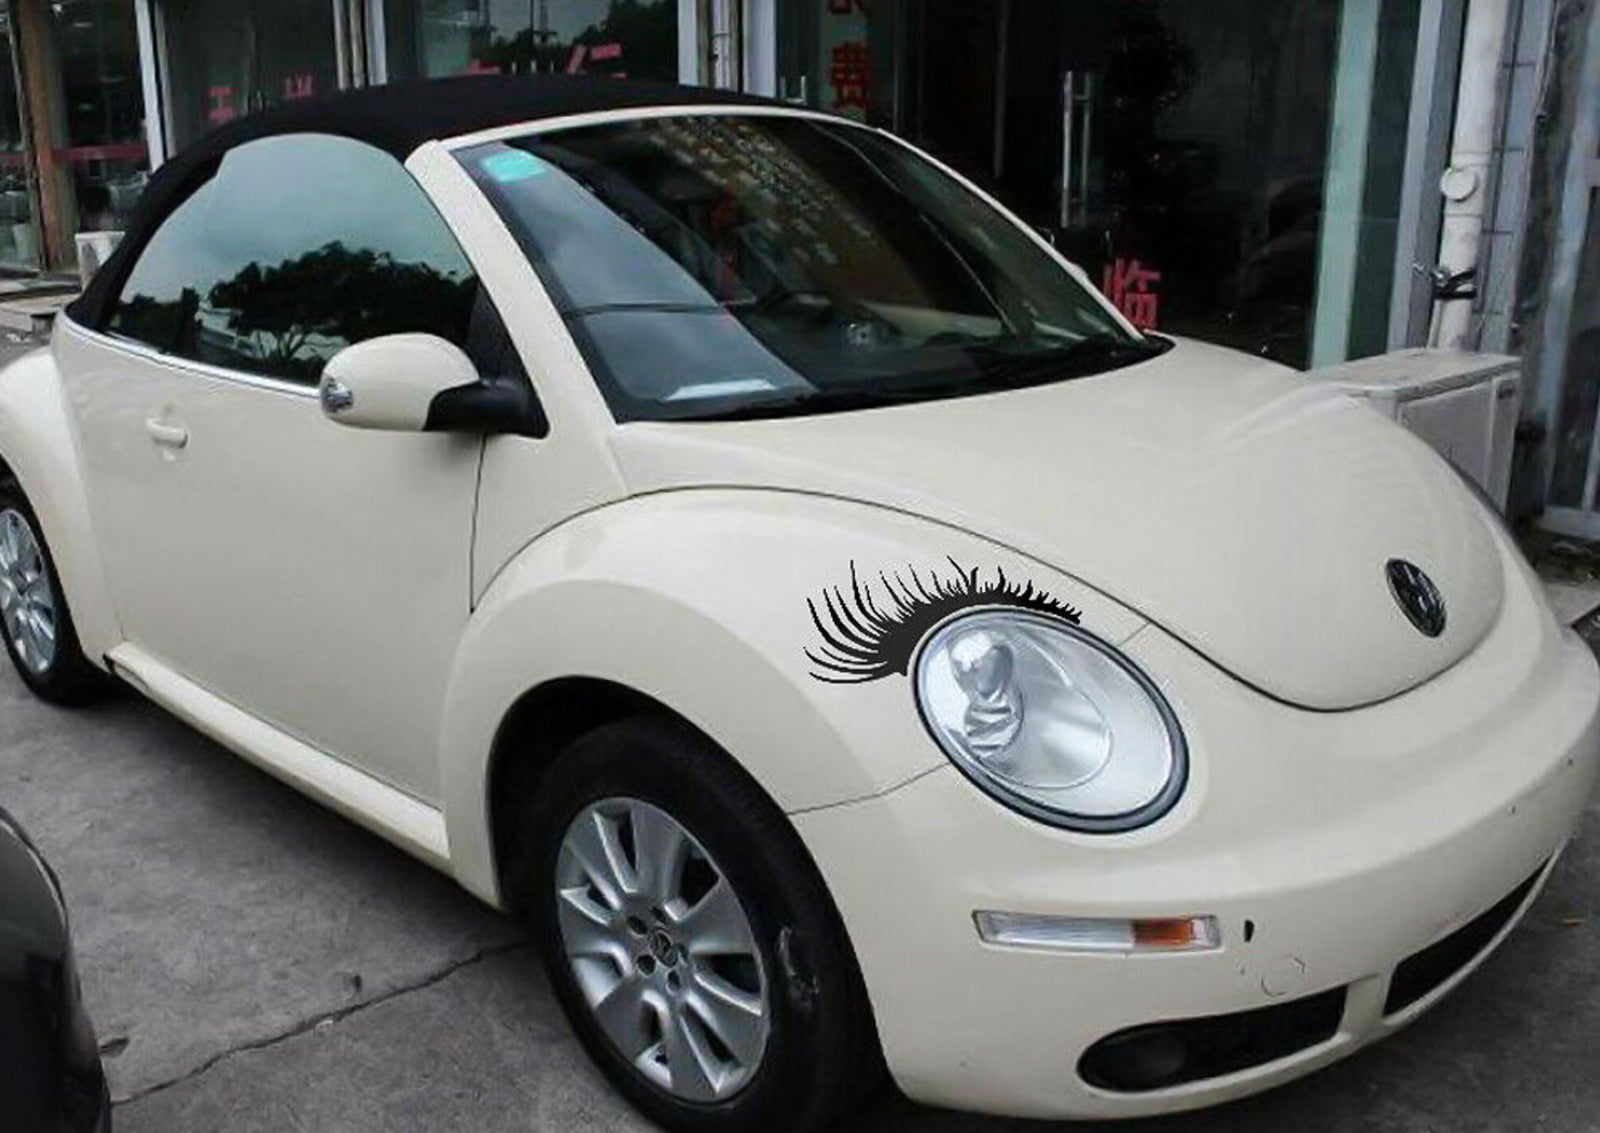 4 PCS Car Eyelashes Decal Stickers Funny Cute Auto Body Stickers